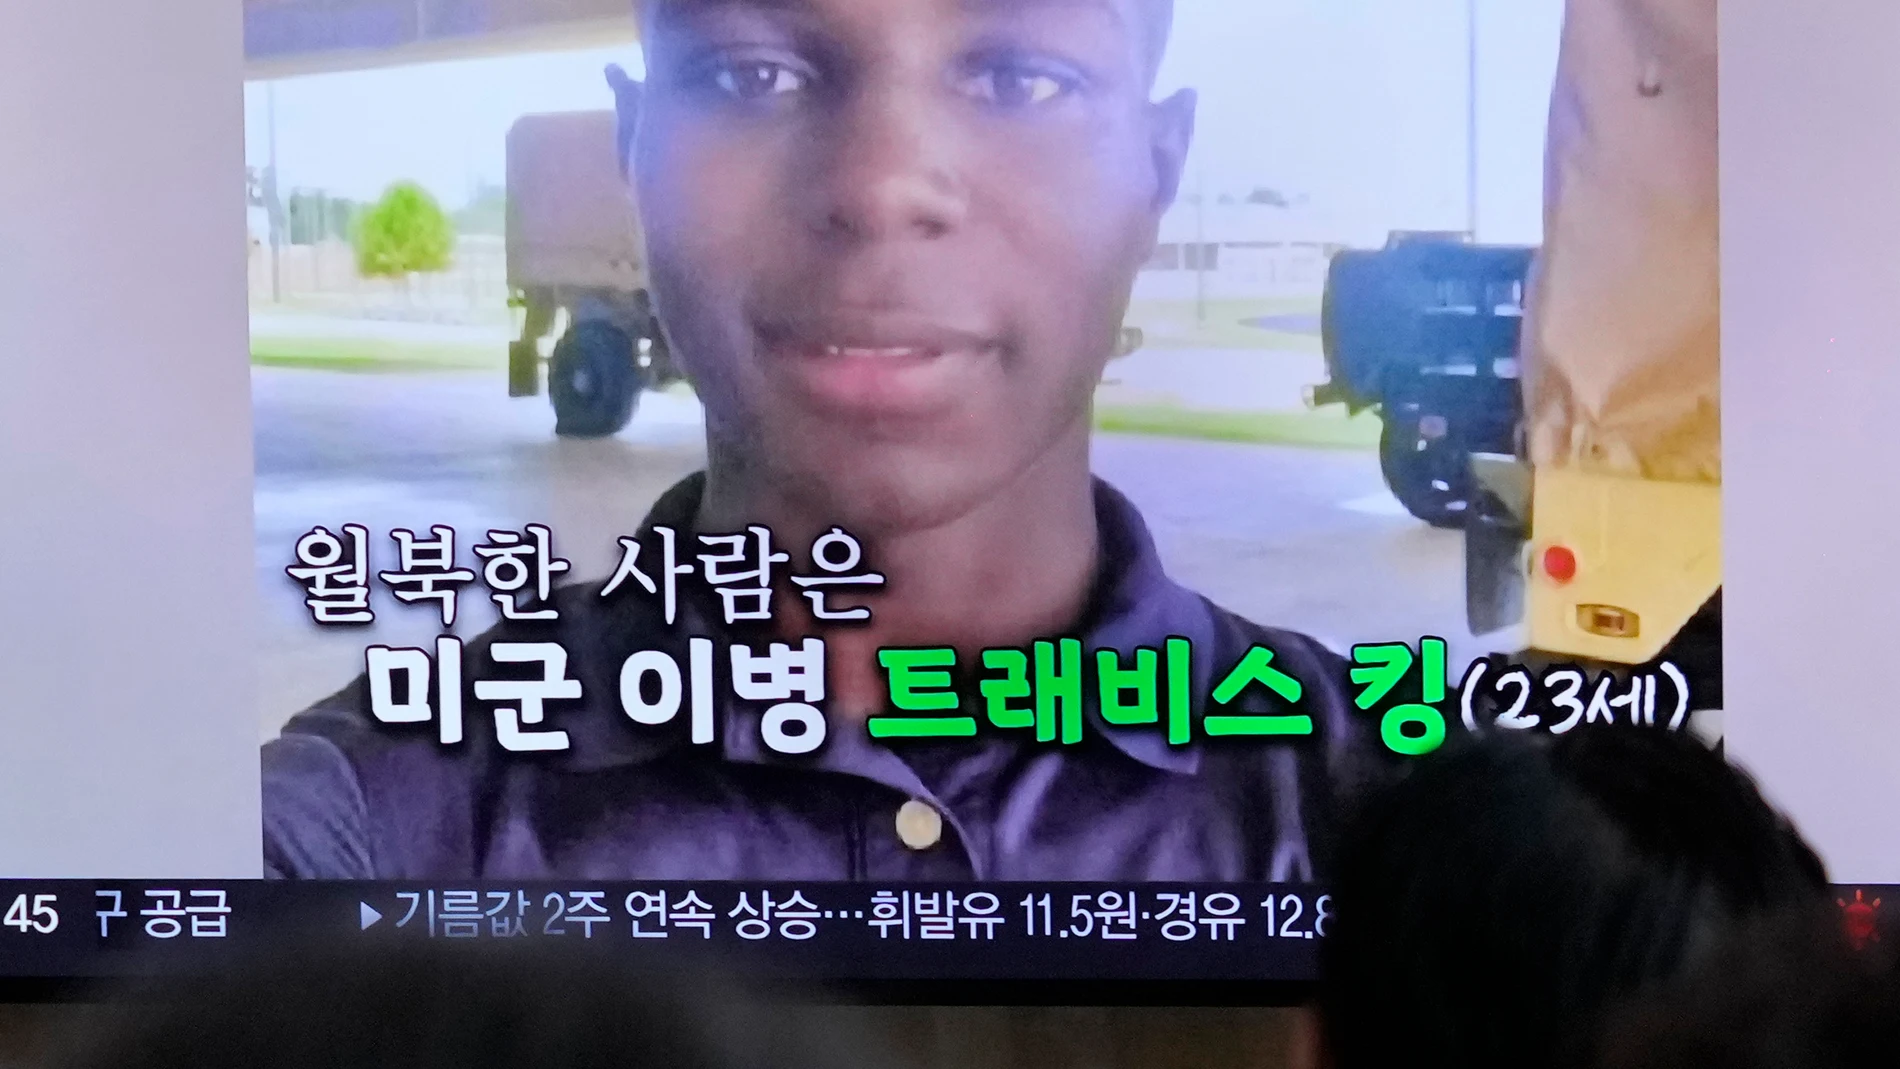 A TV screen shows a file image of American soldier Travis King during a news program at the Seoul Railway Station in Seoul, South Korea, Saturday, July 22, 2023. King bolted into North Korea while on a tour of the Demilitarized Zone on Tuesday, a day after he was supposed to travel to a base in the U.S. The Korean words on the screen reads, "The person who ran to North Korea is U.S. soldier Private Travis King (age 23)." (AP Photo/Ahn Young-joon)